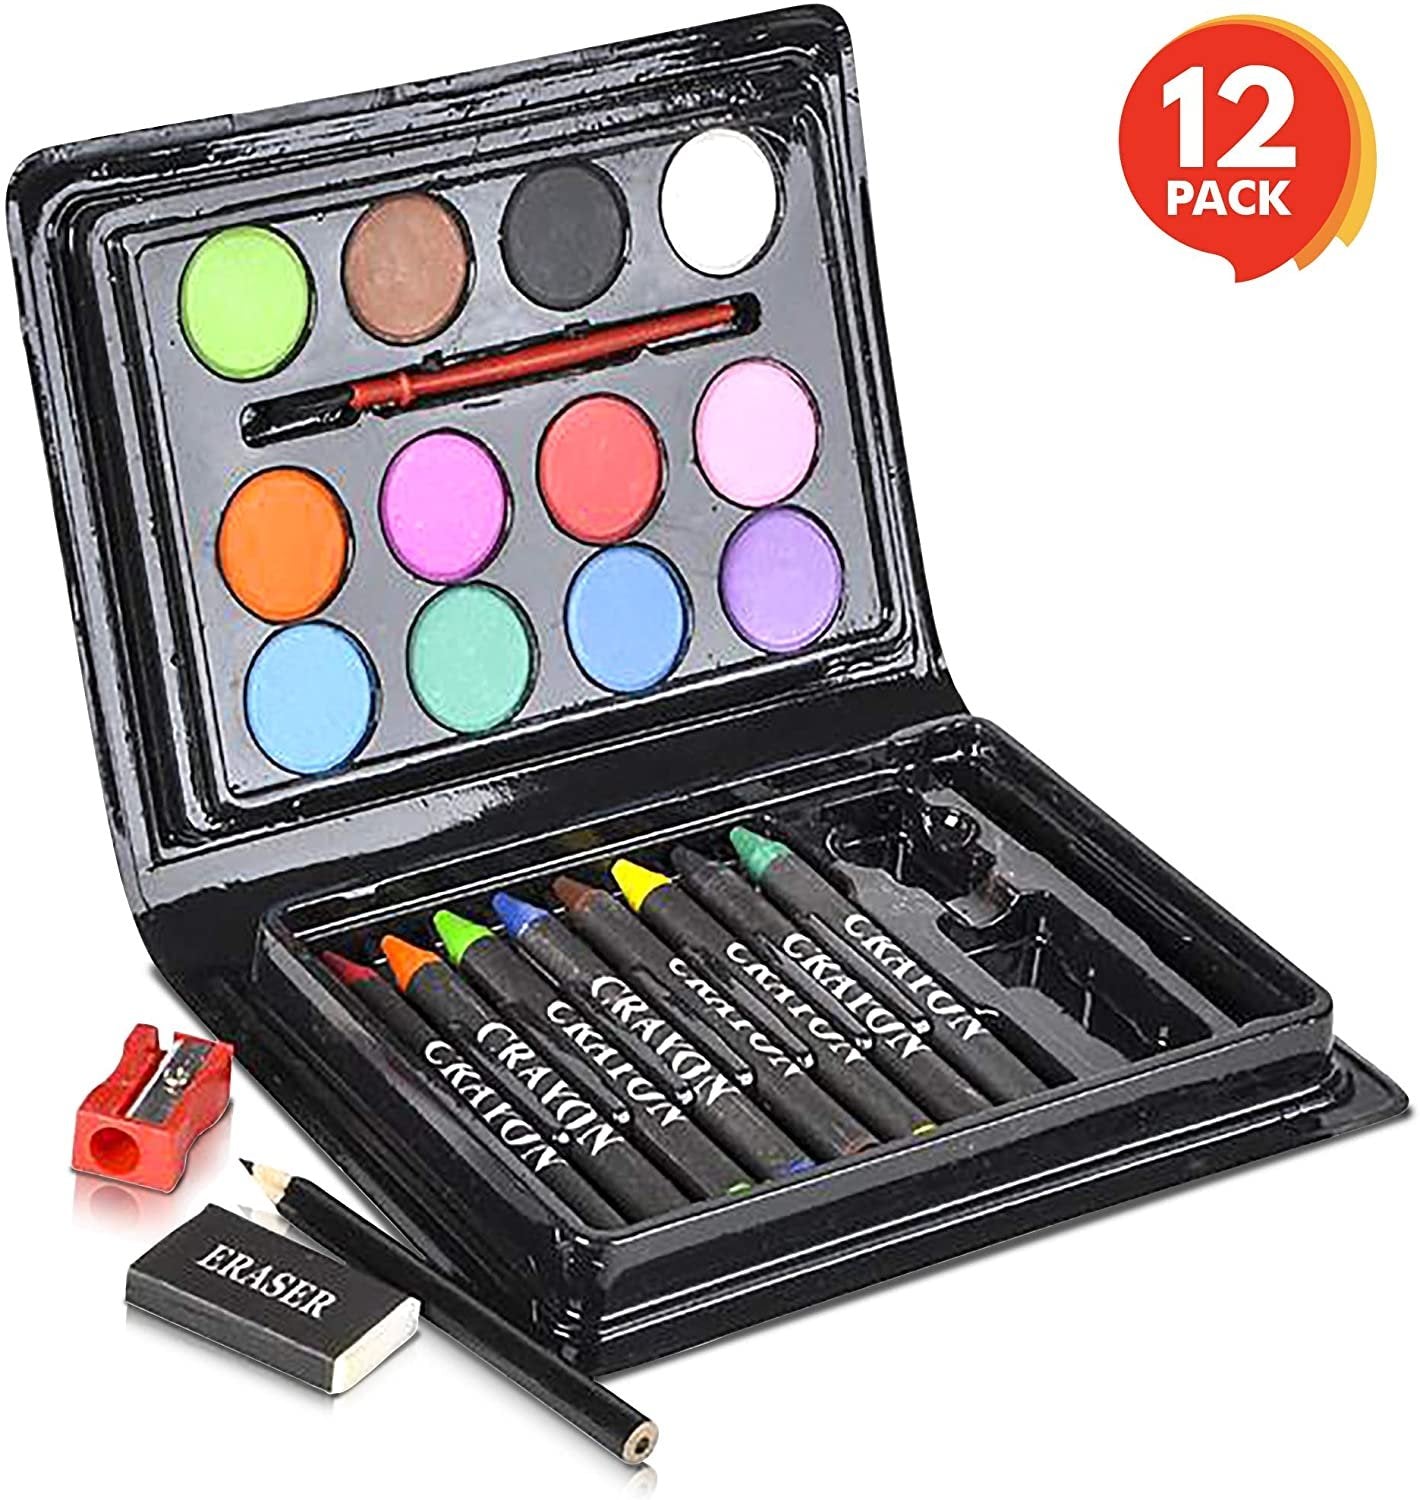 Mini Art Sets for Kids - Pack of 12-23-Piece Kits with Watercolors, Crayons, Paint Brush and More - Fun Art Supplies, Party Favors for Girls and Boys, Goody Bag Fillers, Carnival Prize